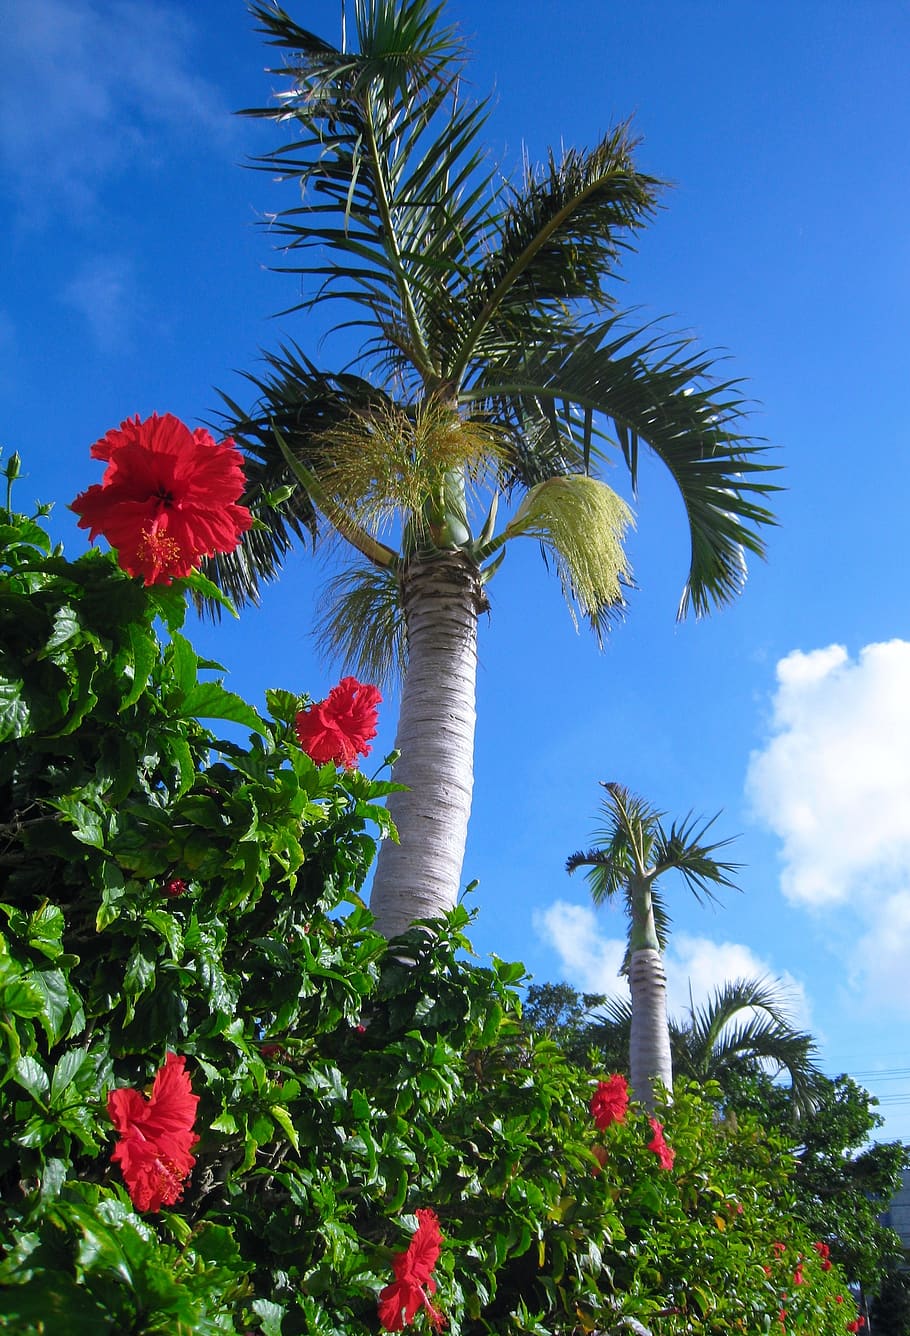 hibiscus, flowers, red, leaf, palm trees, green, sky, wind, cloud, blue